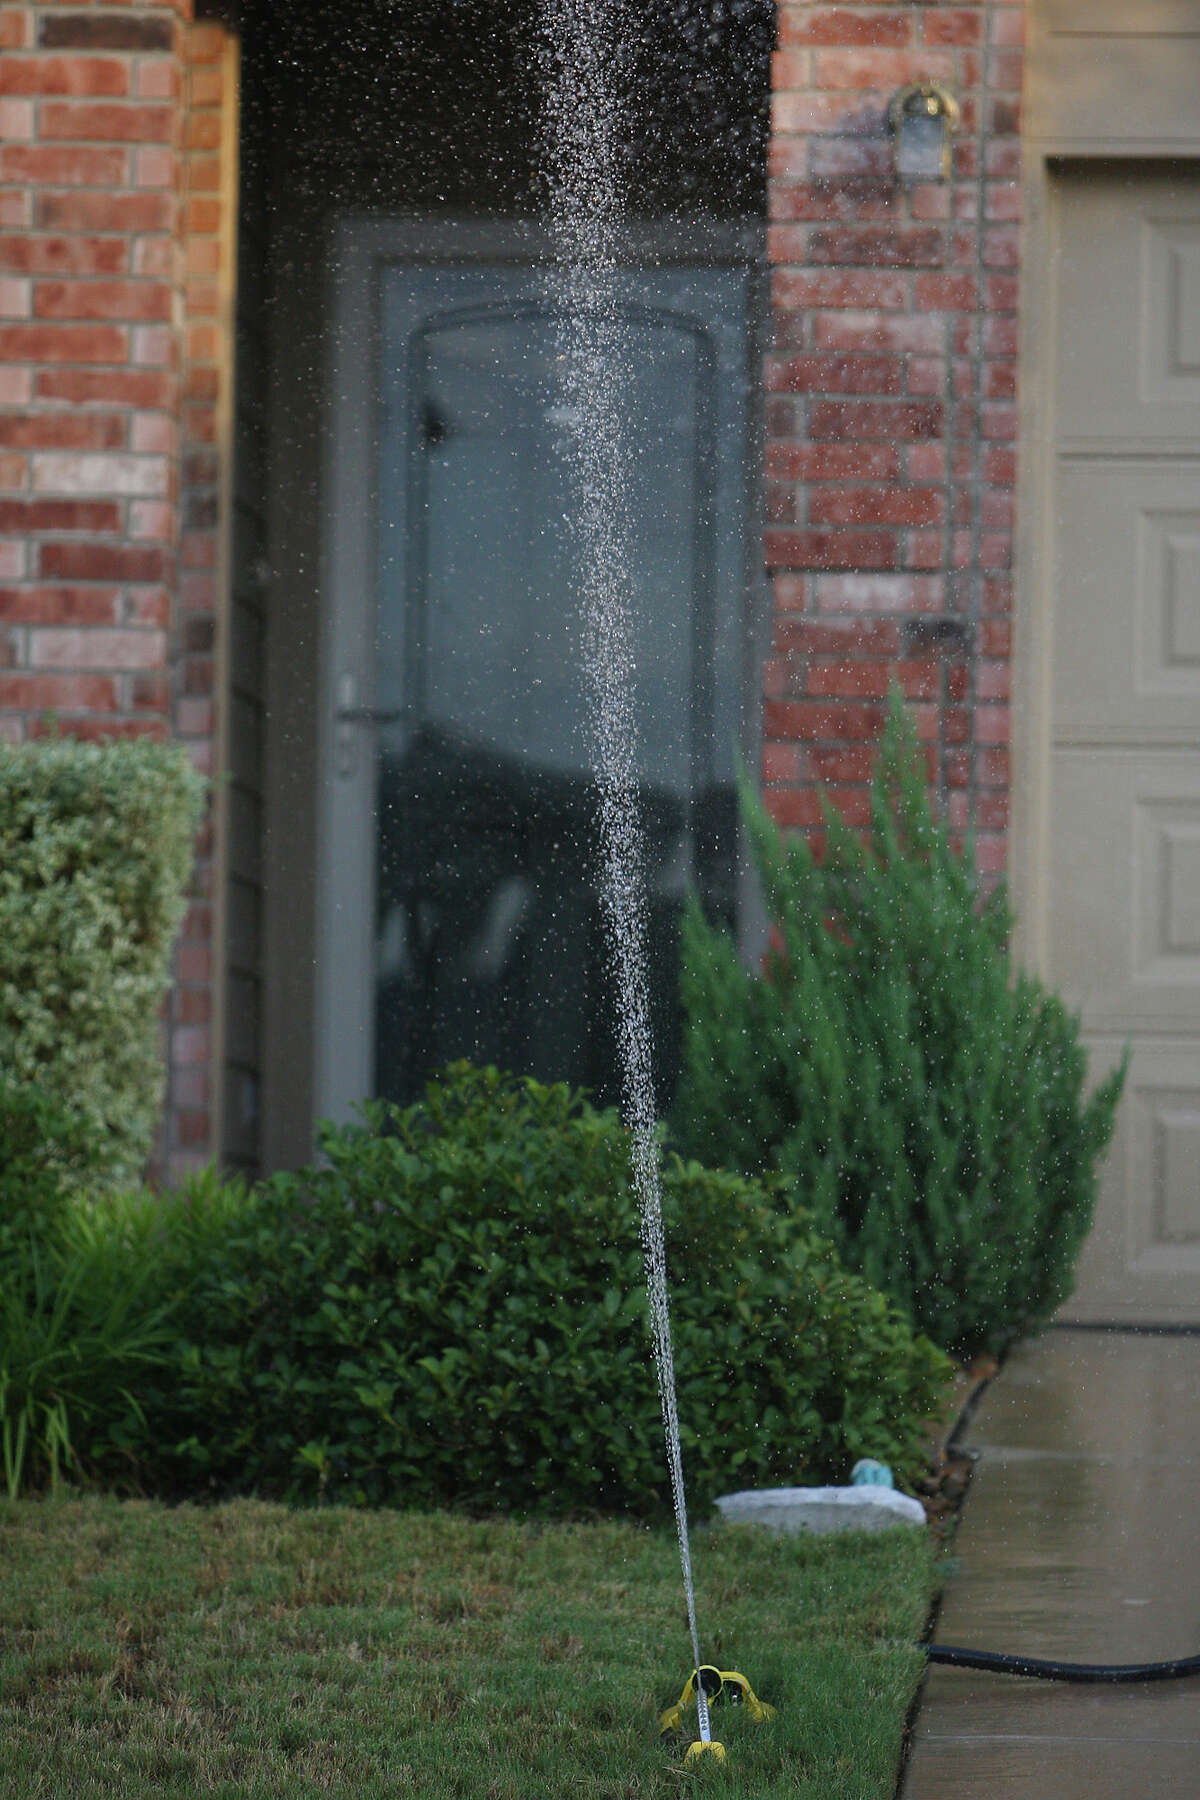 What goes up doesn’t always come down. Much of the water sprayed high in the air is lost to evaporation and does zilch for the lawn. Choose sprinklers that keep it on the down low.